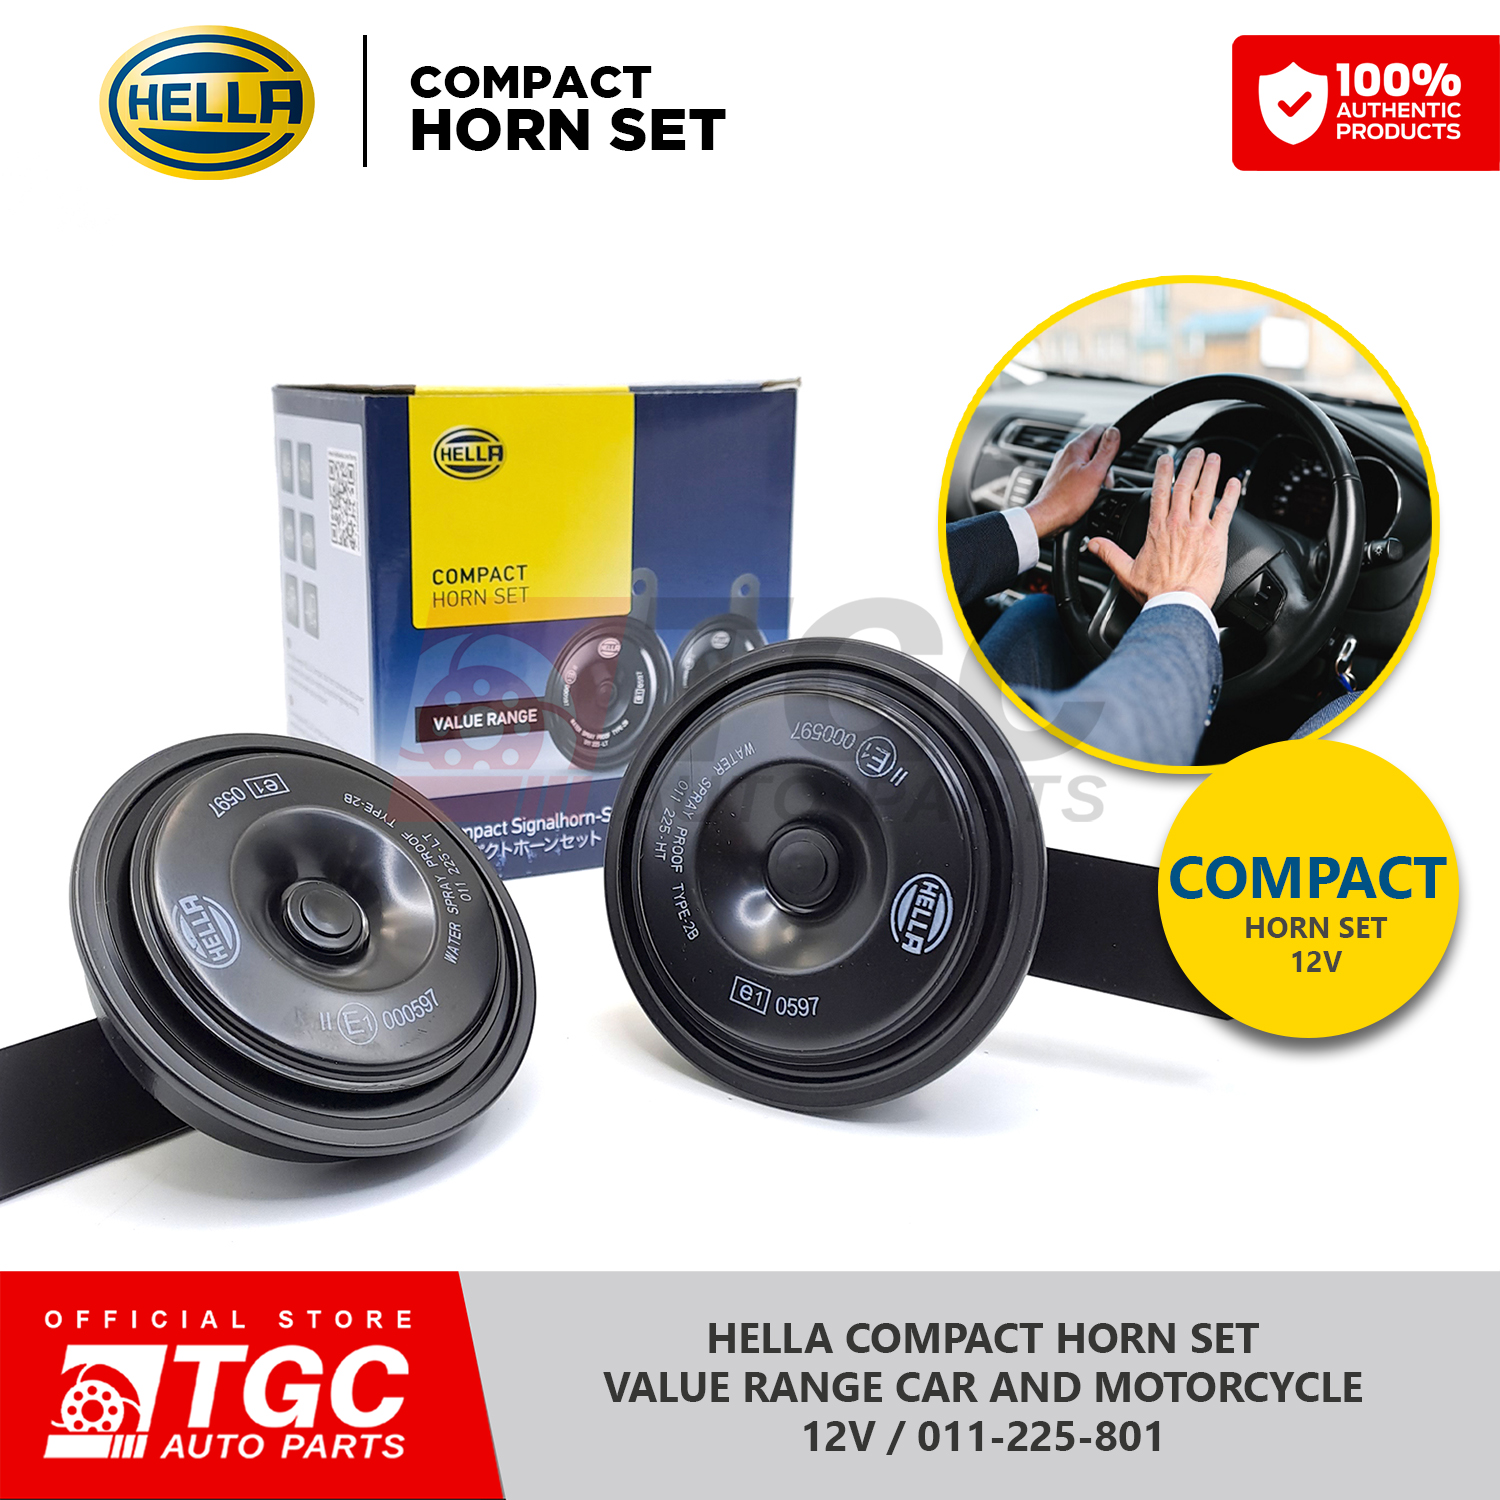 Hella Classic Horn Set / Value Range Car and Motorcycle Horn 3AM